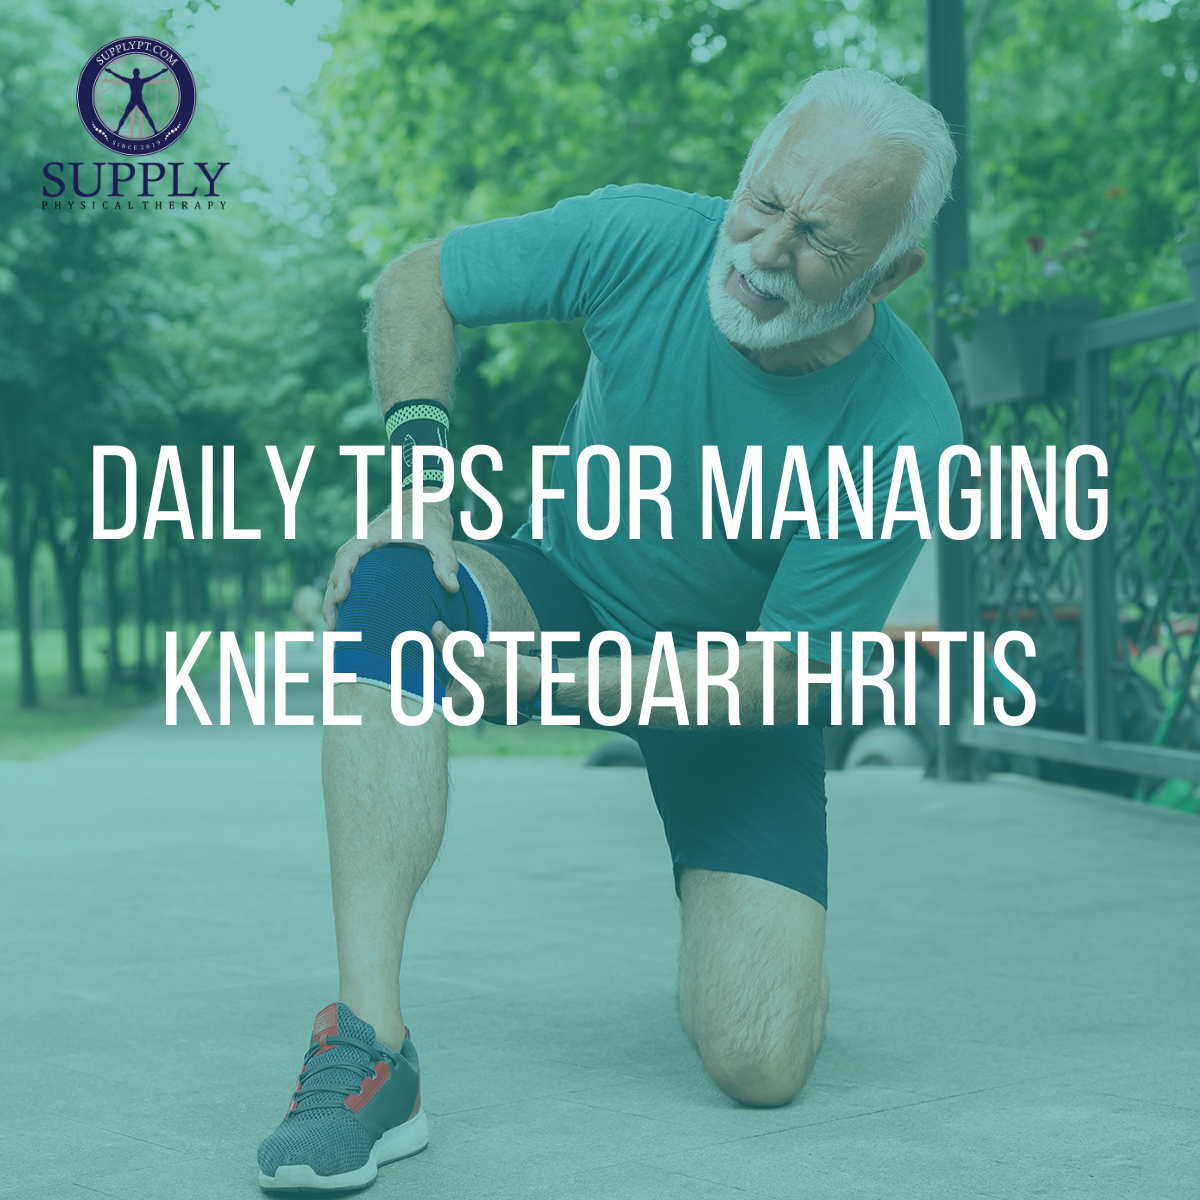 Daily Tips for Managing Knee Osteoarthritis